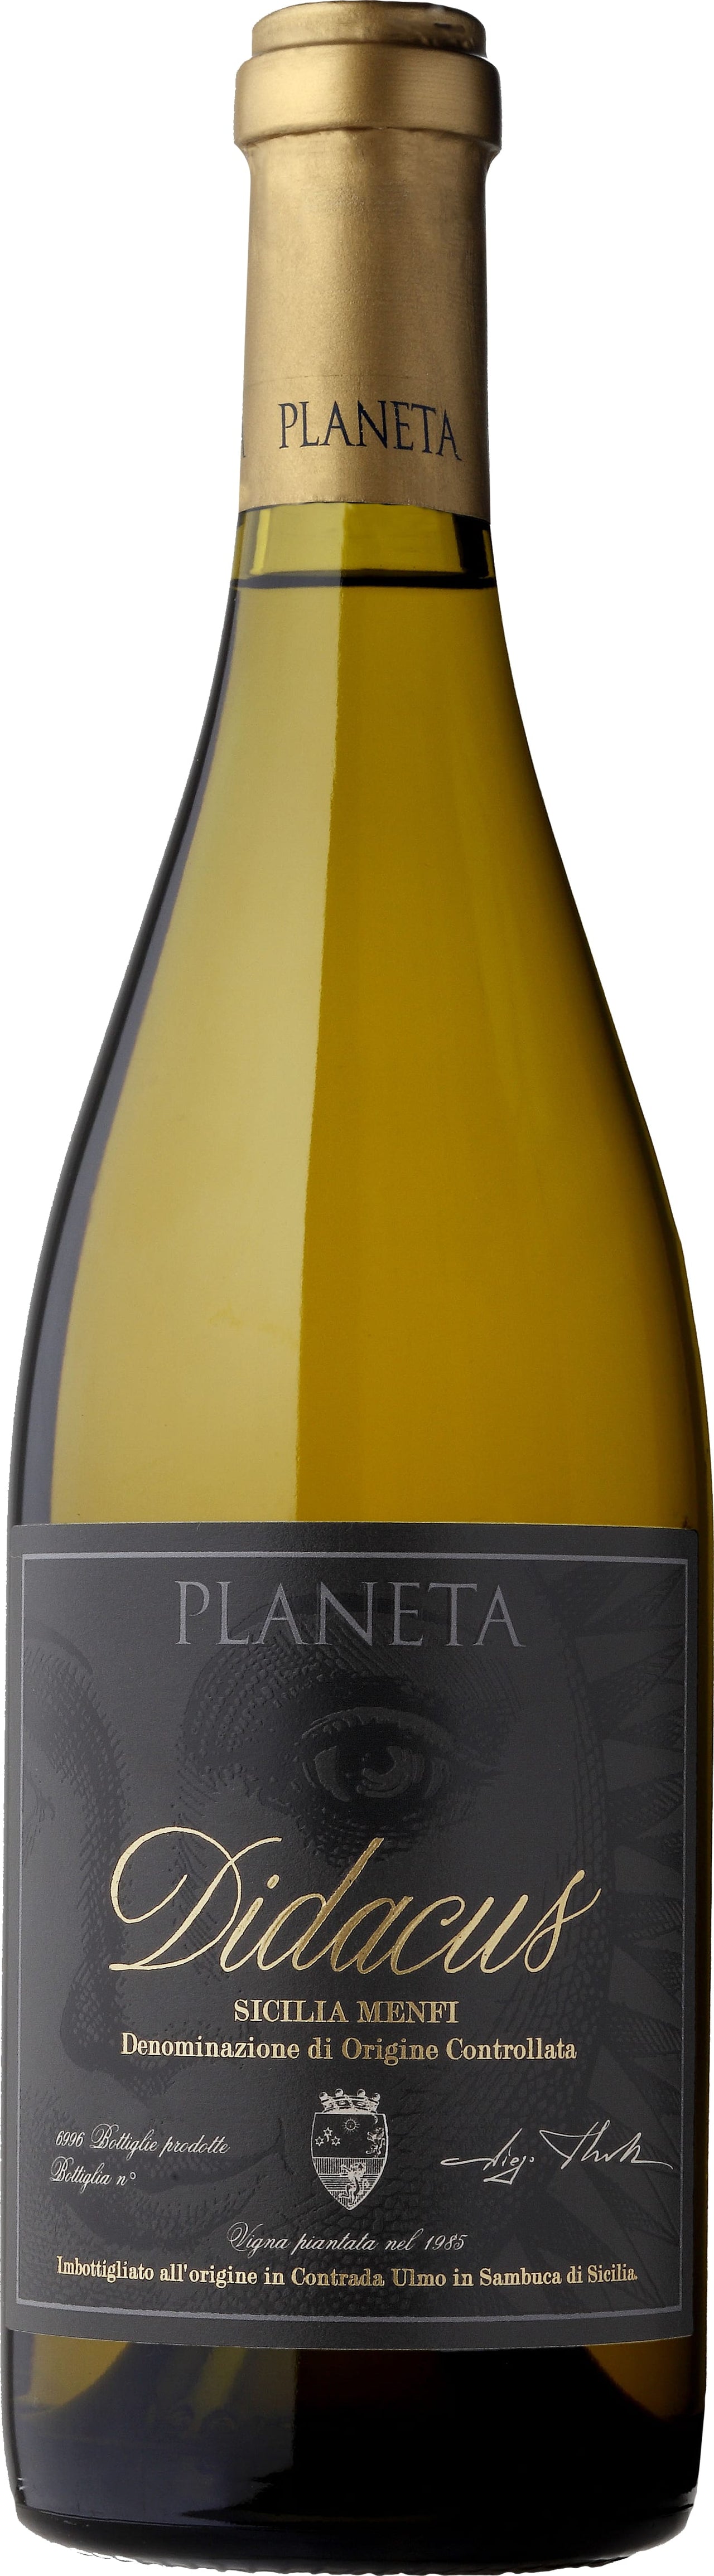 Planeta Didacus 2021 75cl - Buy Planeta Wines from GREAT WINES DIRECT wine shop